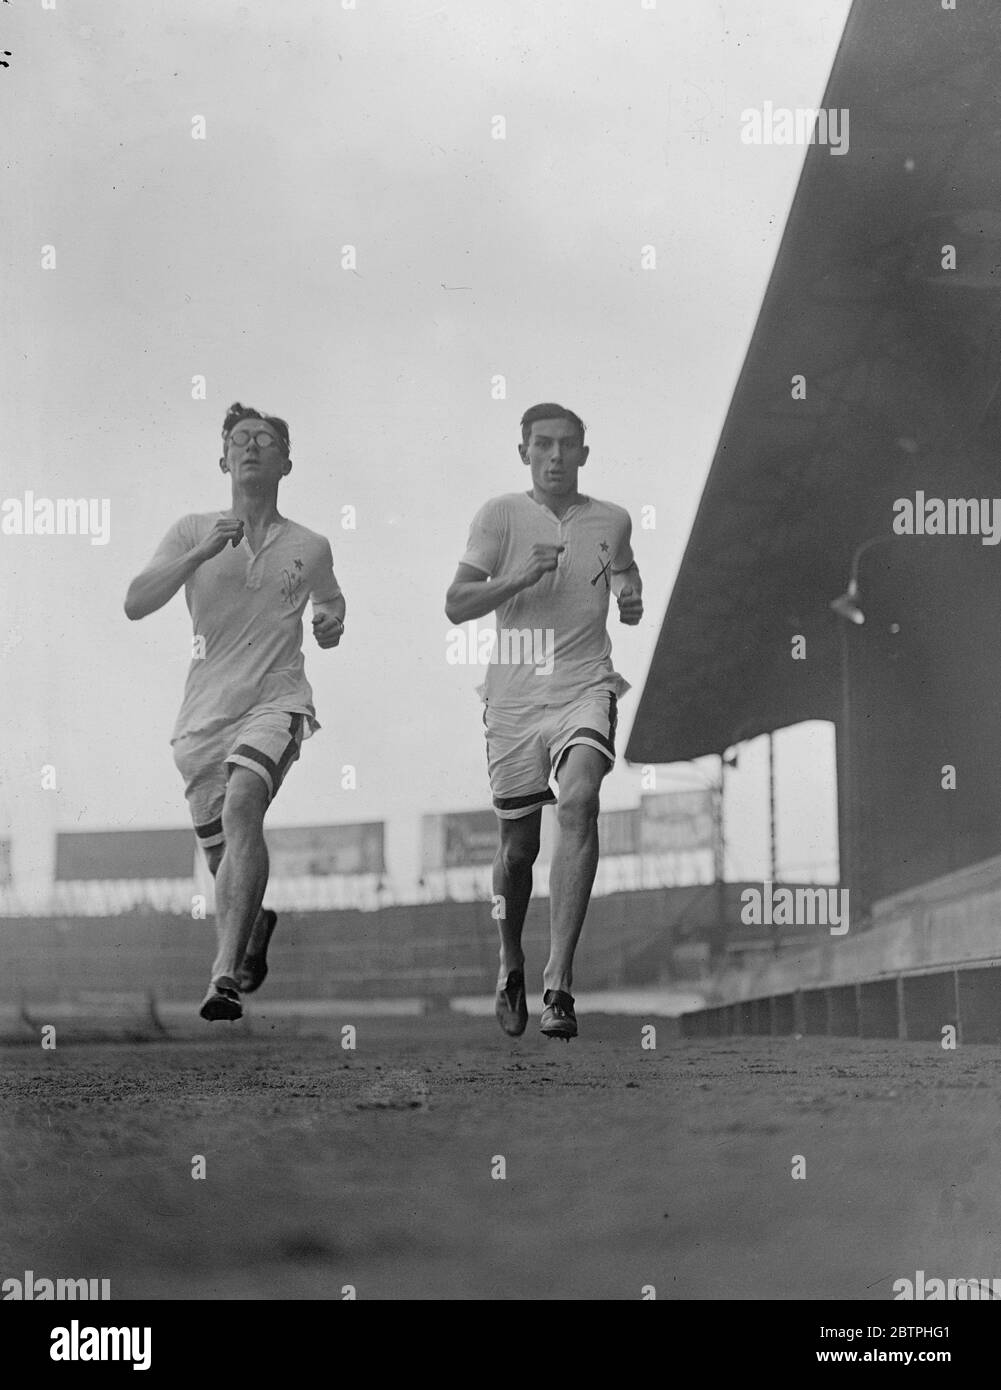 Well off the ground . Public schoolboys prepare for great annual athletic meeting . Public schoolboys throughout the country are preparing for the great annual athletic meeting for the public schools , Challenge cup at Stamford Bridge this week . M J K Sullivan , miler , and P B Edmunds , half miler , both of Shrewsbury School in fine action during practice at Stamford Bridge for the event . Both of them have both feet off the ground . 30 March 1932 Stock Photo